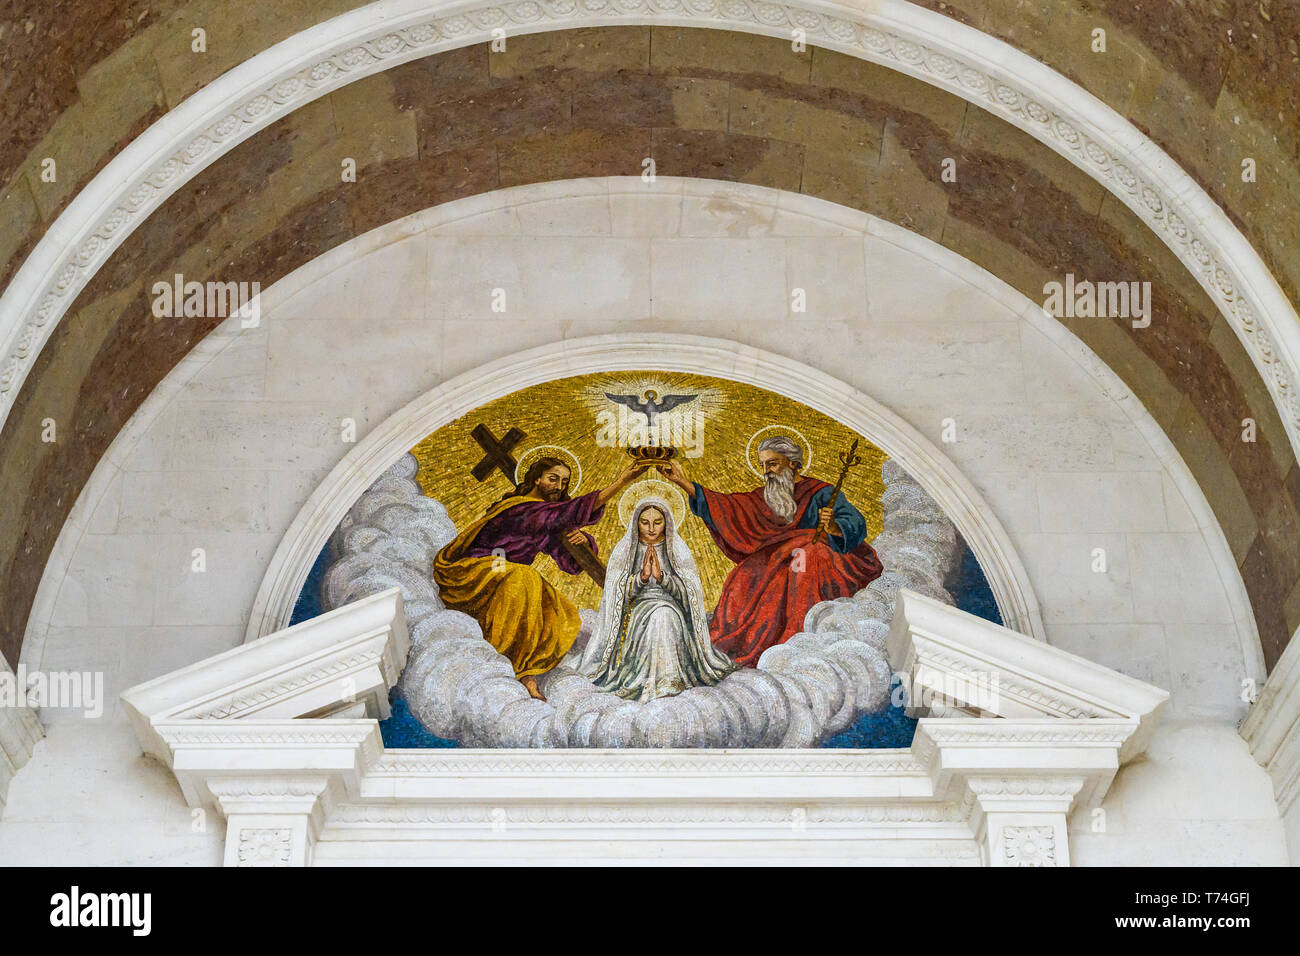 Artwork and architectural detail, Basilica of Our Lady of the Rosary; Fatima, Ourem Municipality, Santarem District, Portugal Stock Photo